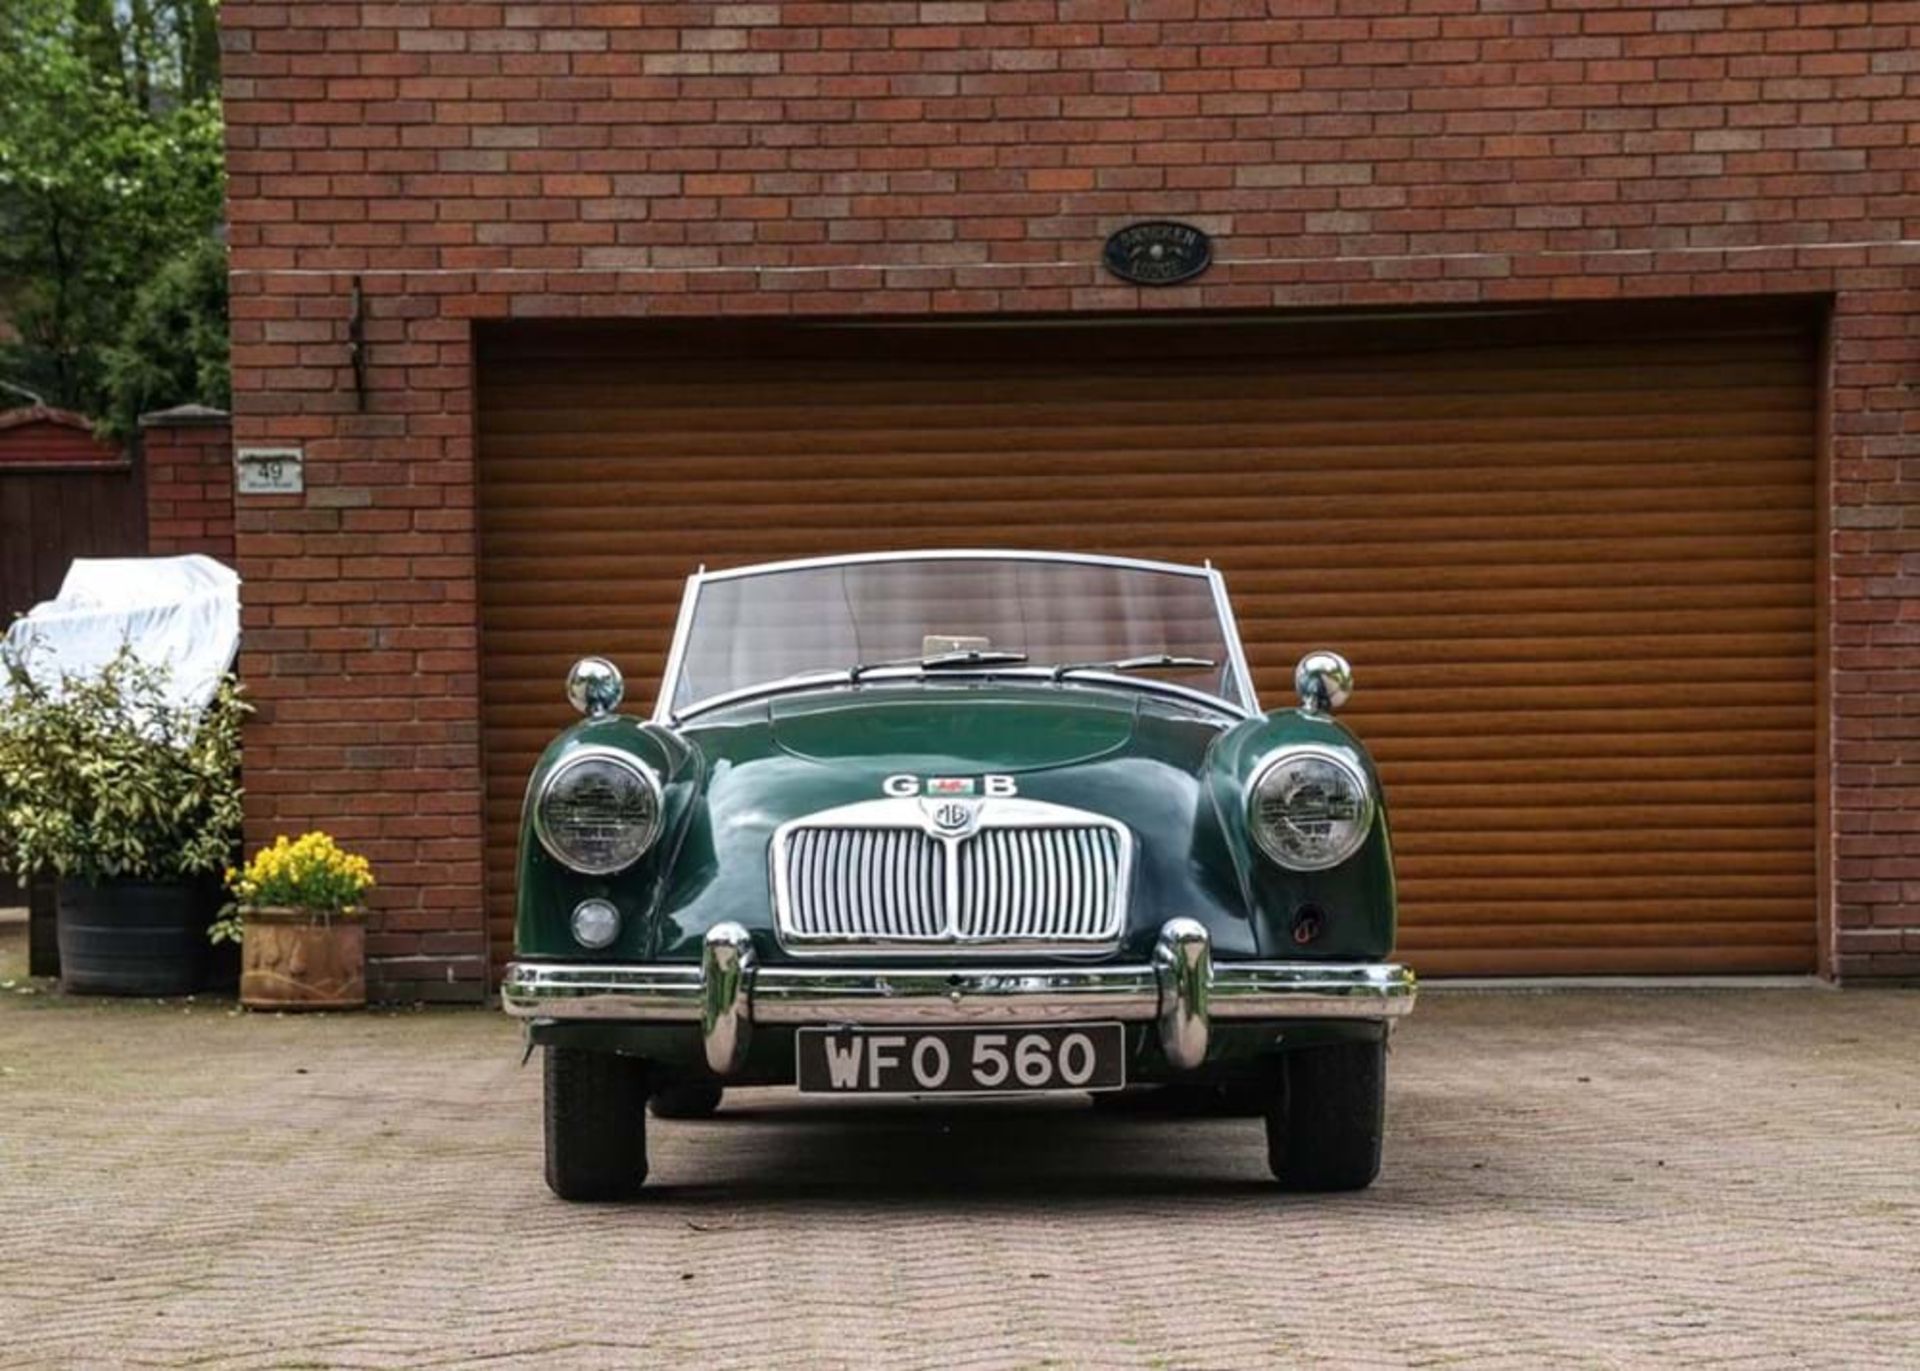 1957 MG A Roadster (1500) - Image 10 of 10